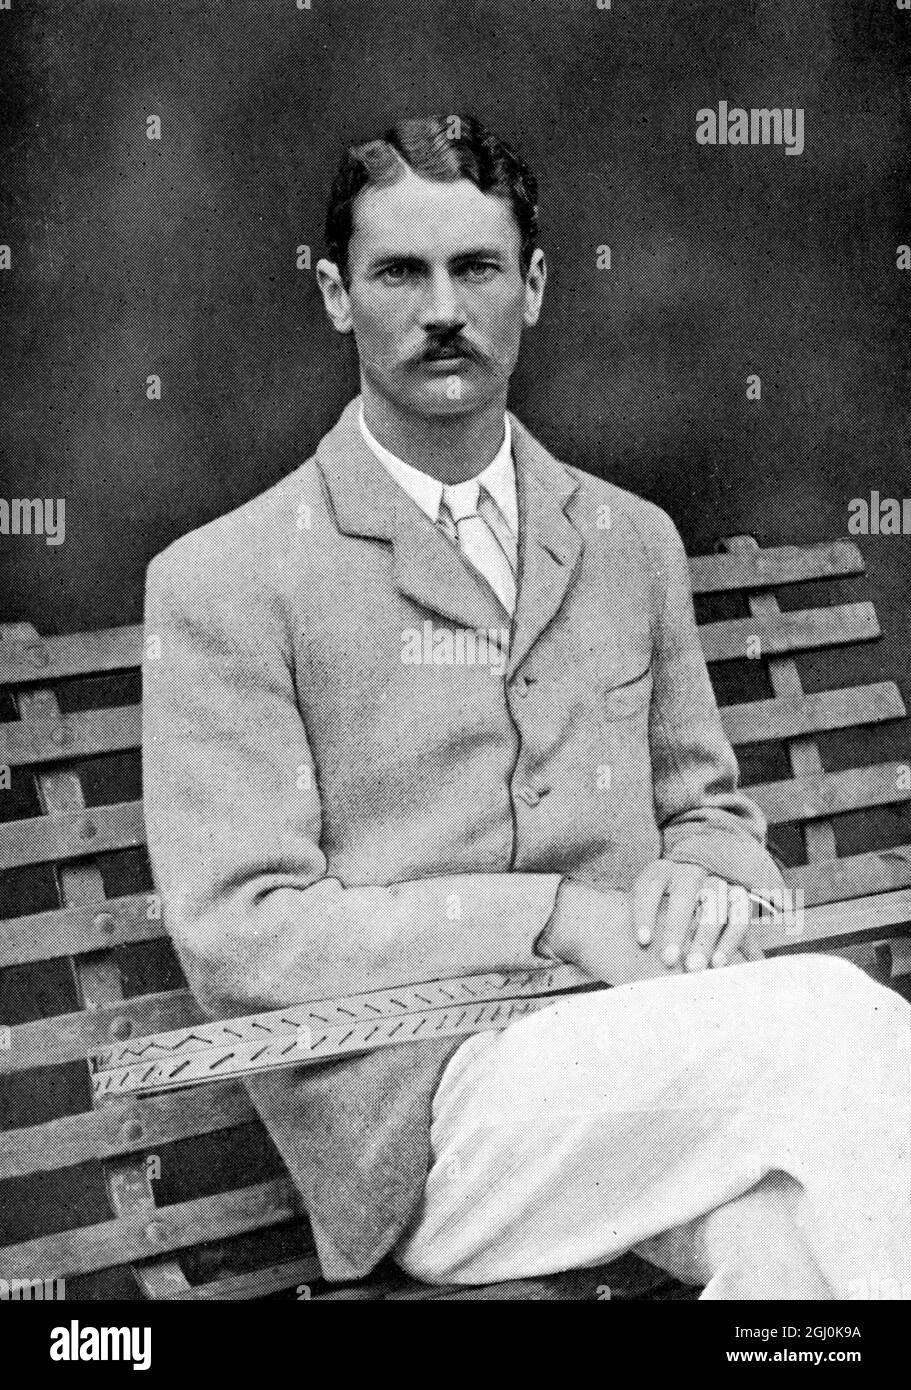 H. S. Mahony 1896 Harold Segerson Mahony (born 13 February 1867 in Edinburgh - died 27 June 1905) was a male tennis player from Ireland. He is best remembered for his victory at Wimbledon in 1896. ©TopFoto Stock Photo